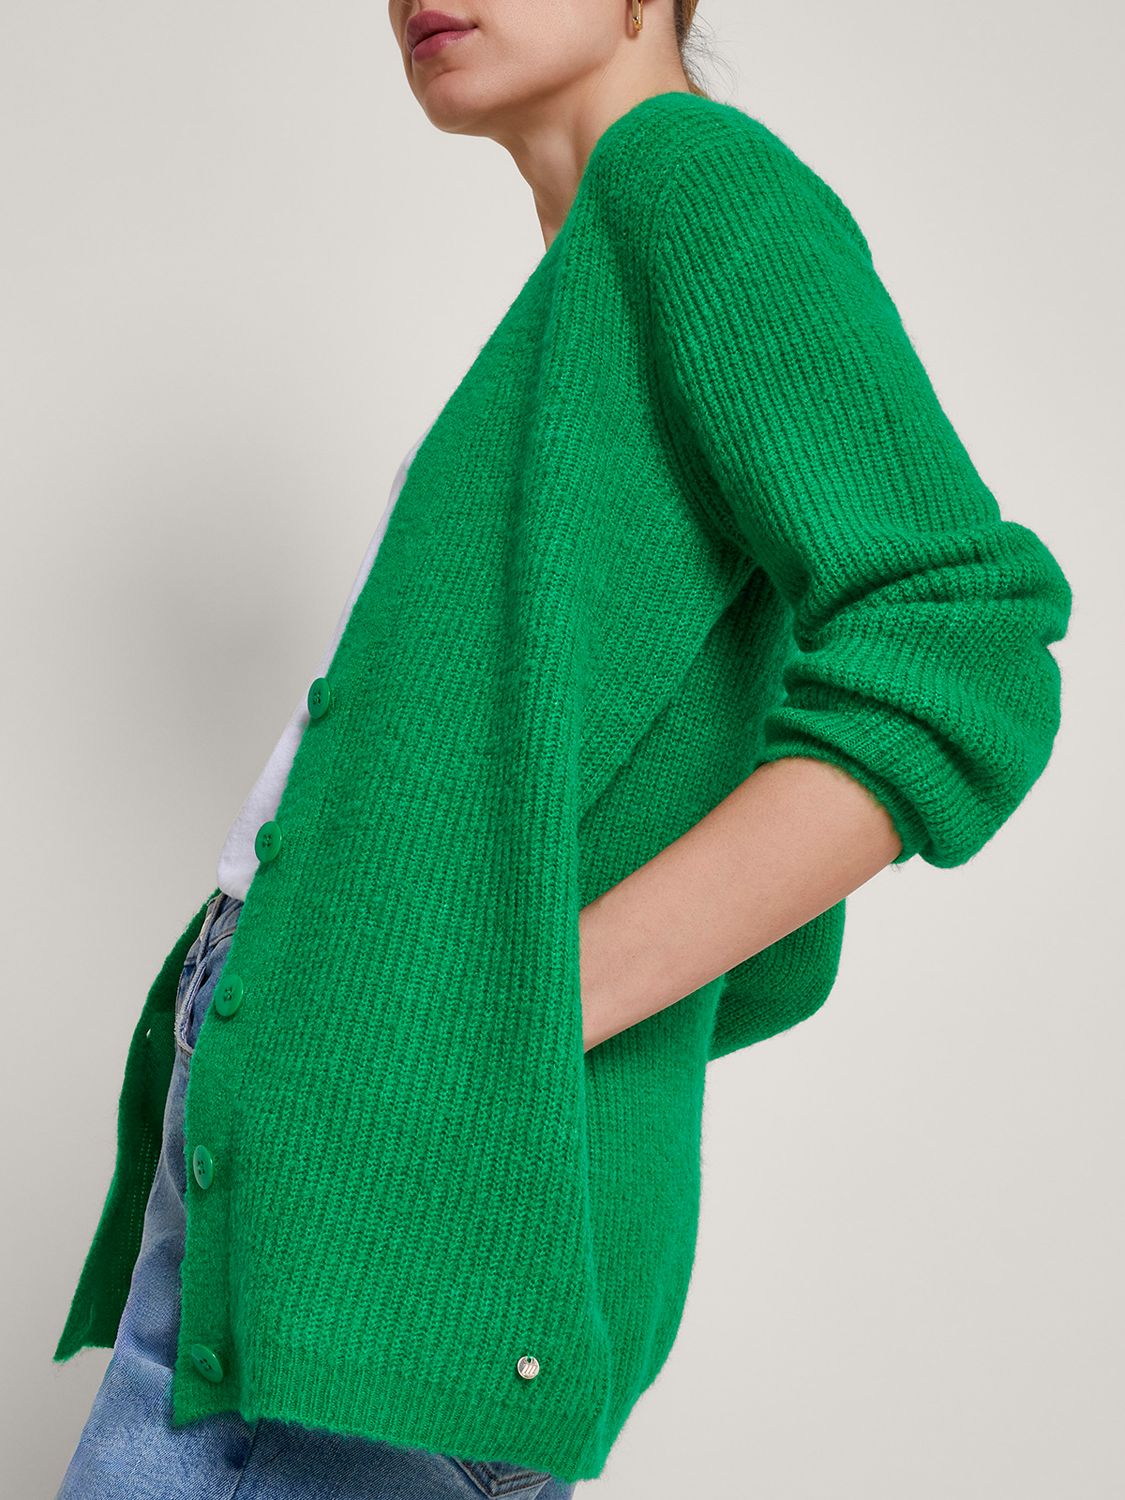 Buy Monsoon Sula Supersoft Rib Knit Cardigan, Green Online at johnlewis.com